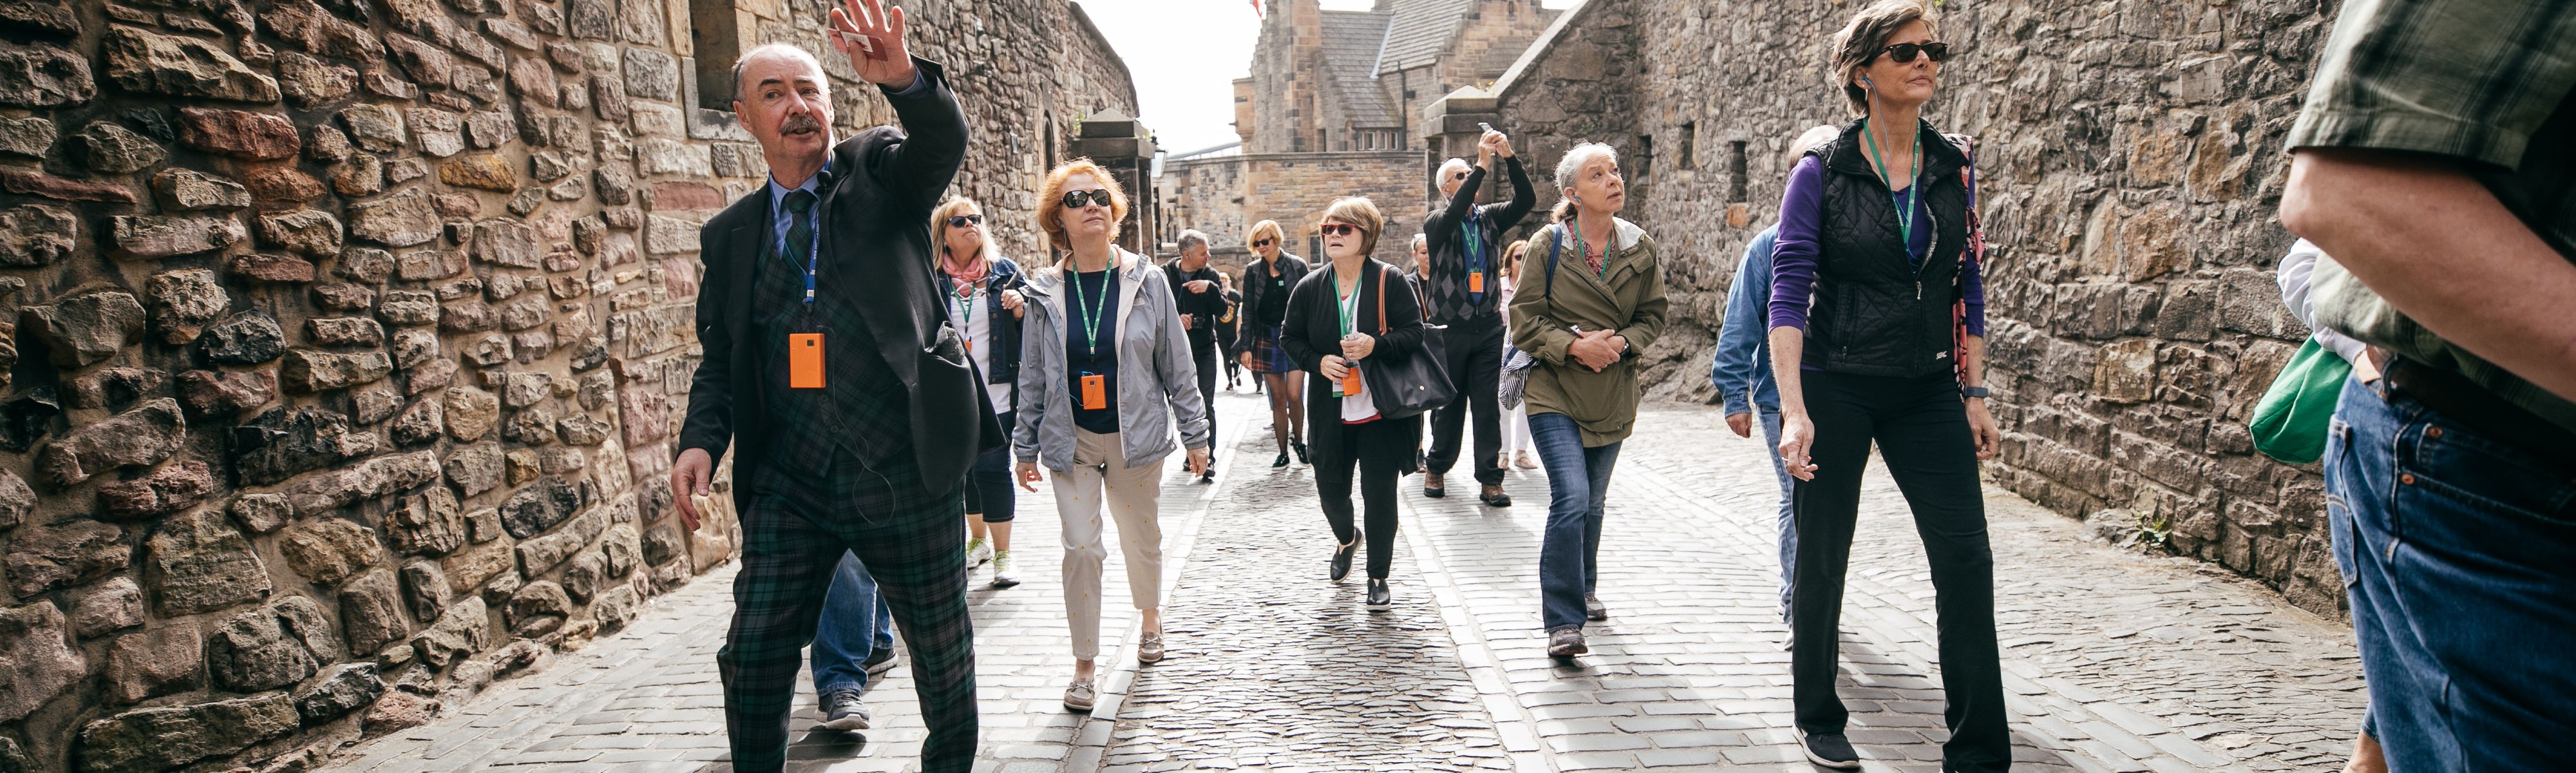 tour group walking down cobble stone path in scotland with local guide